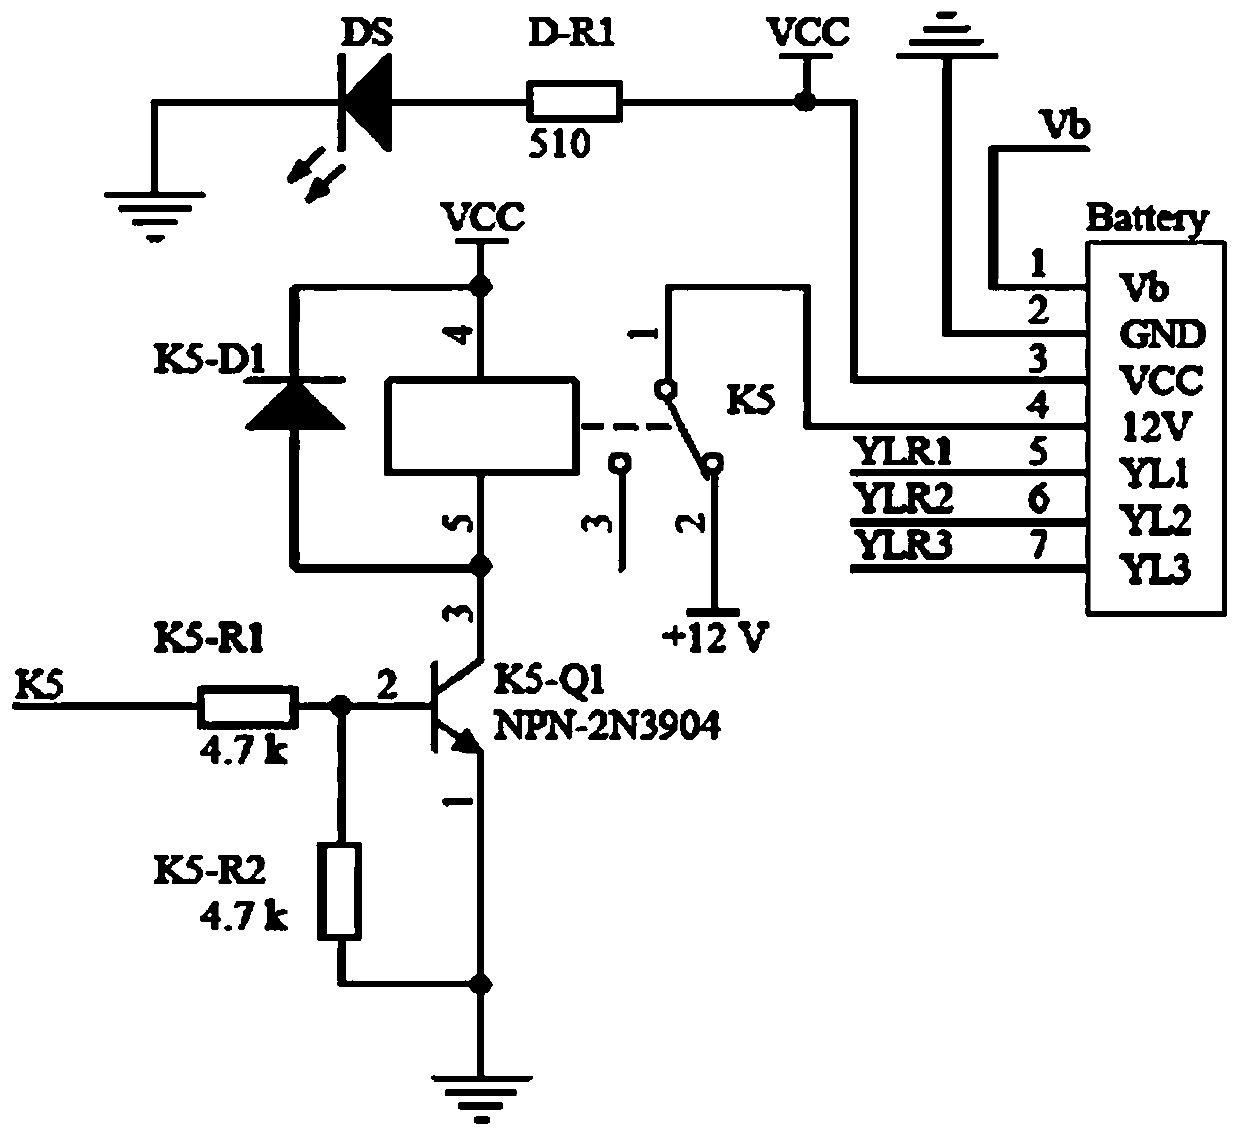 Control system of solar AC charging piles based on HCS08 single-chip microcomputer